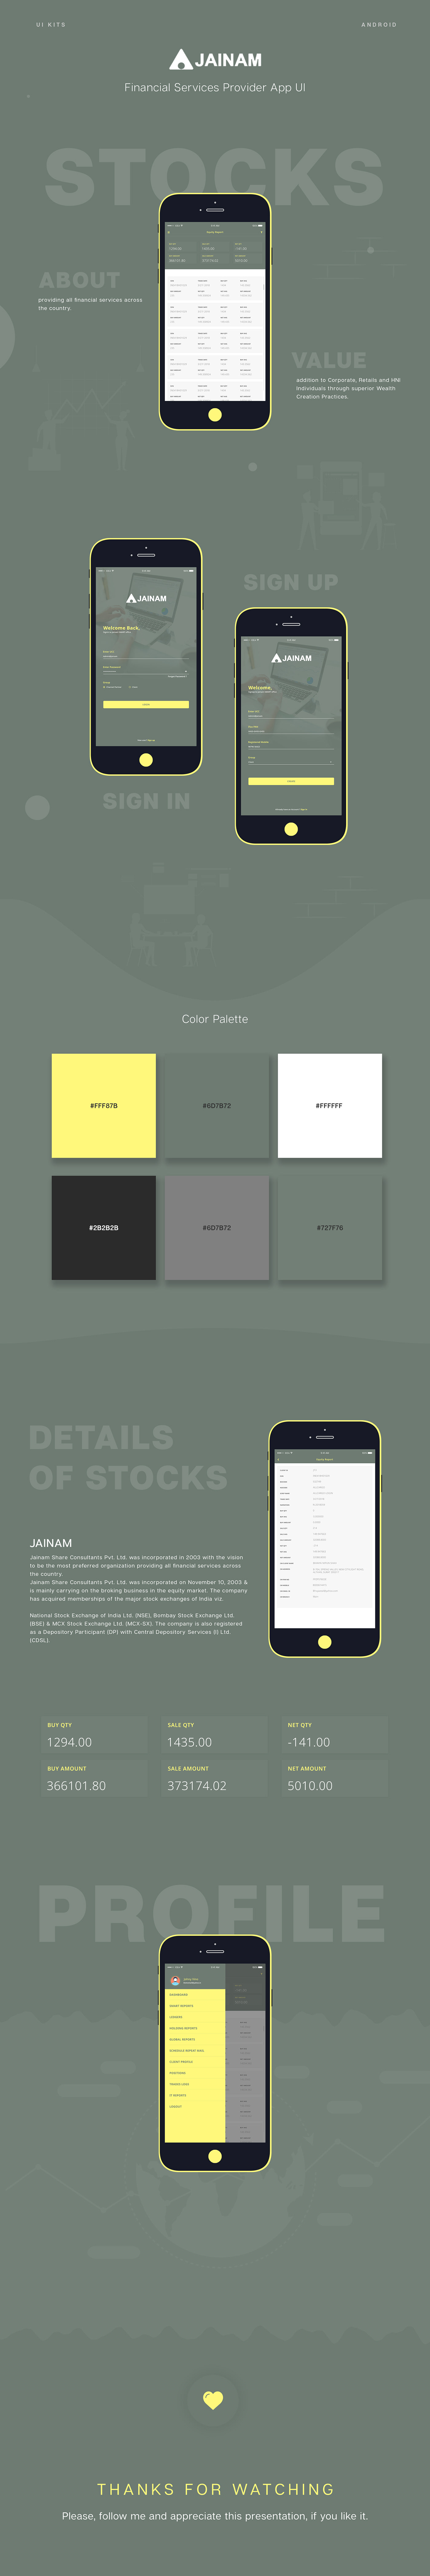 UI ux Web apps ios android finance stocks intrection Interface